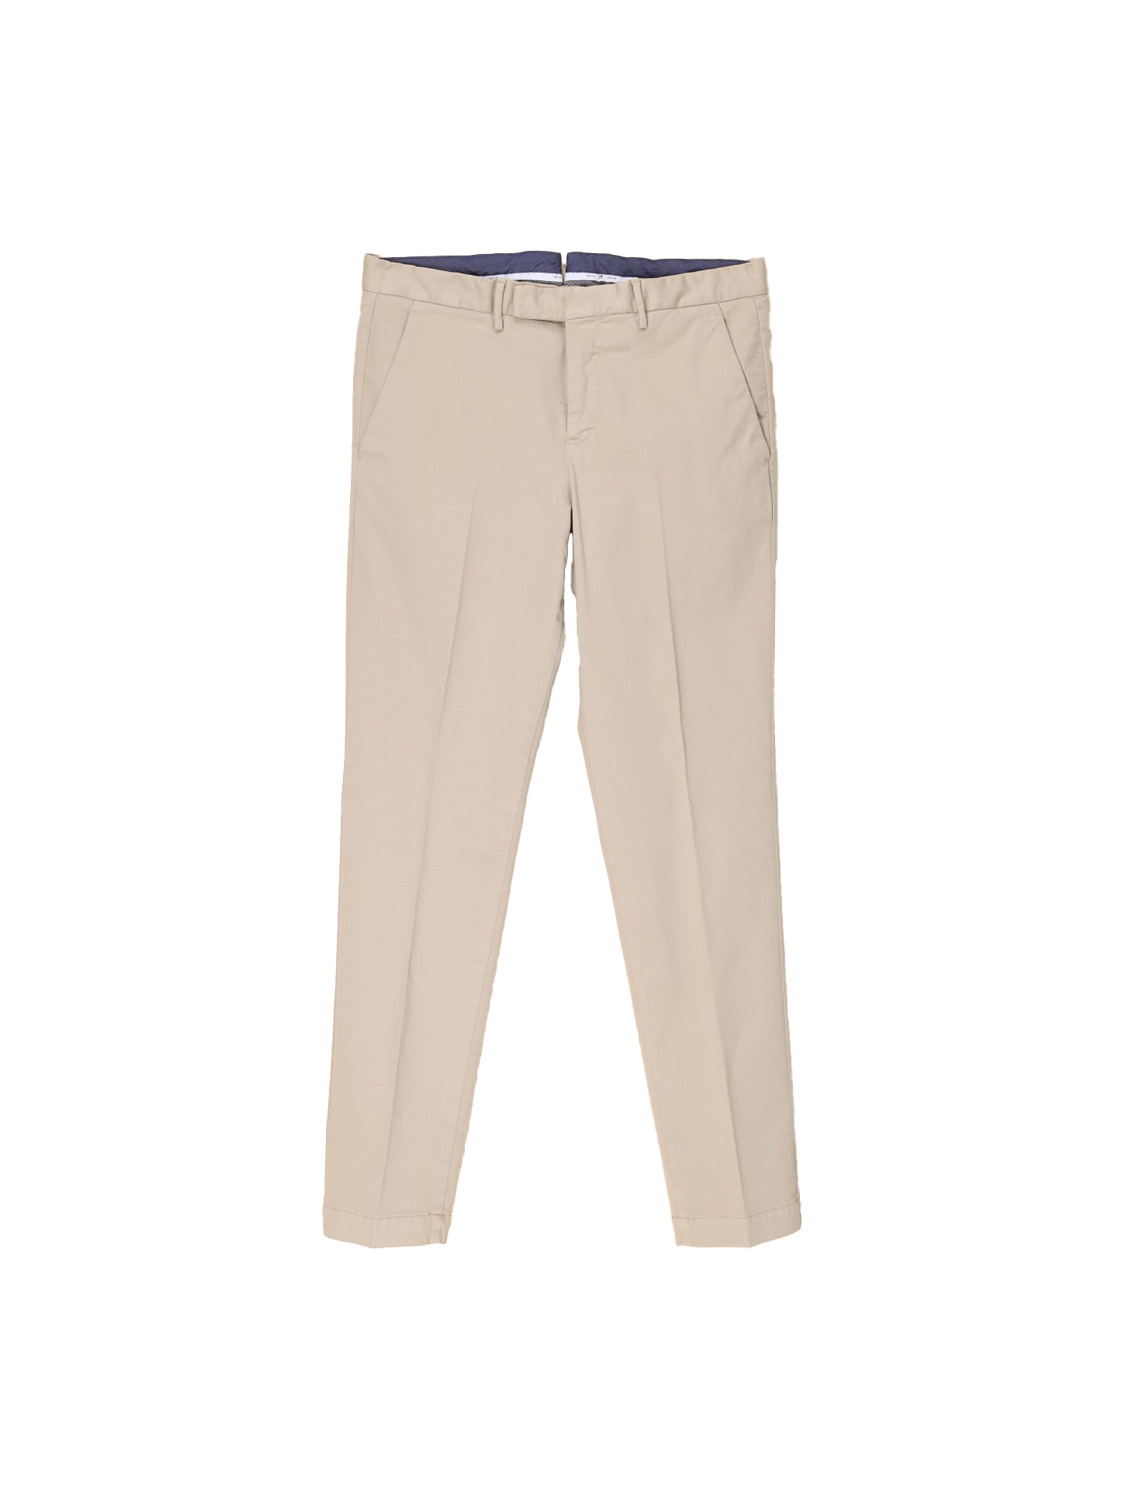 Stretchy cotton trousers in chino style 